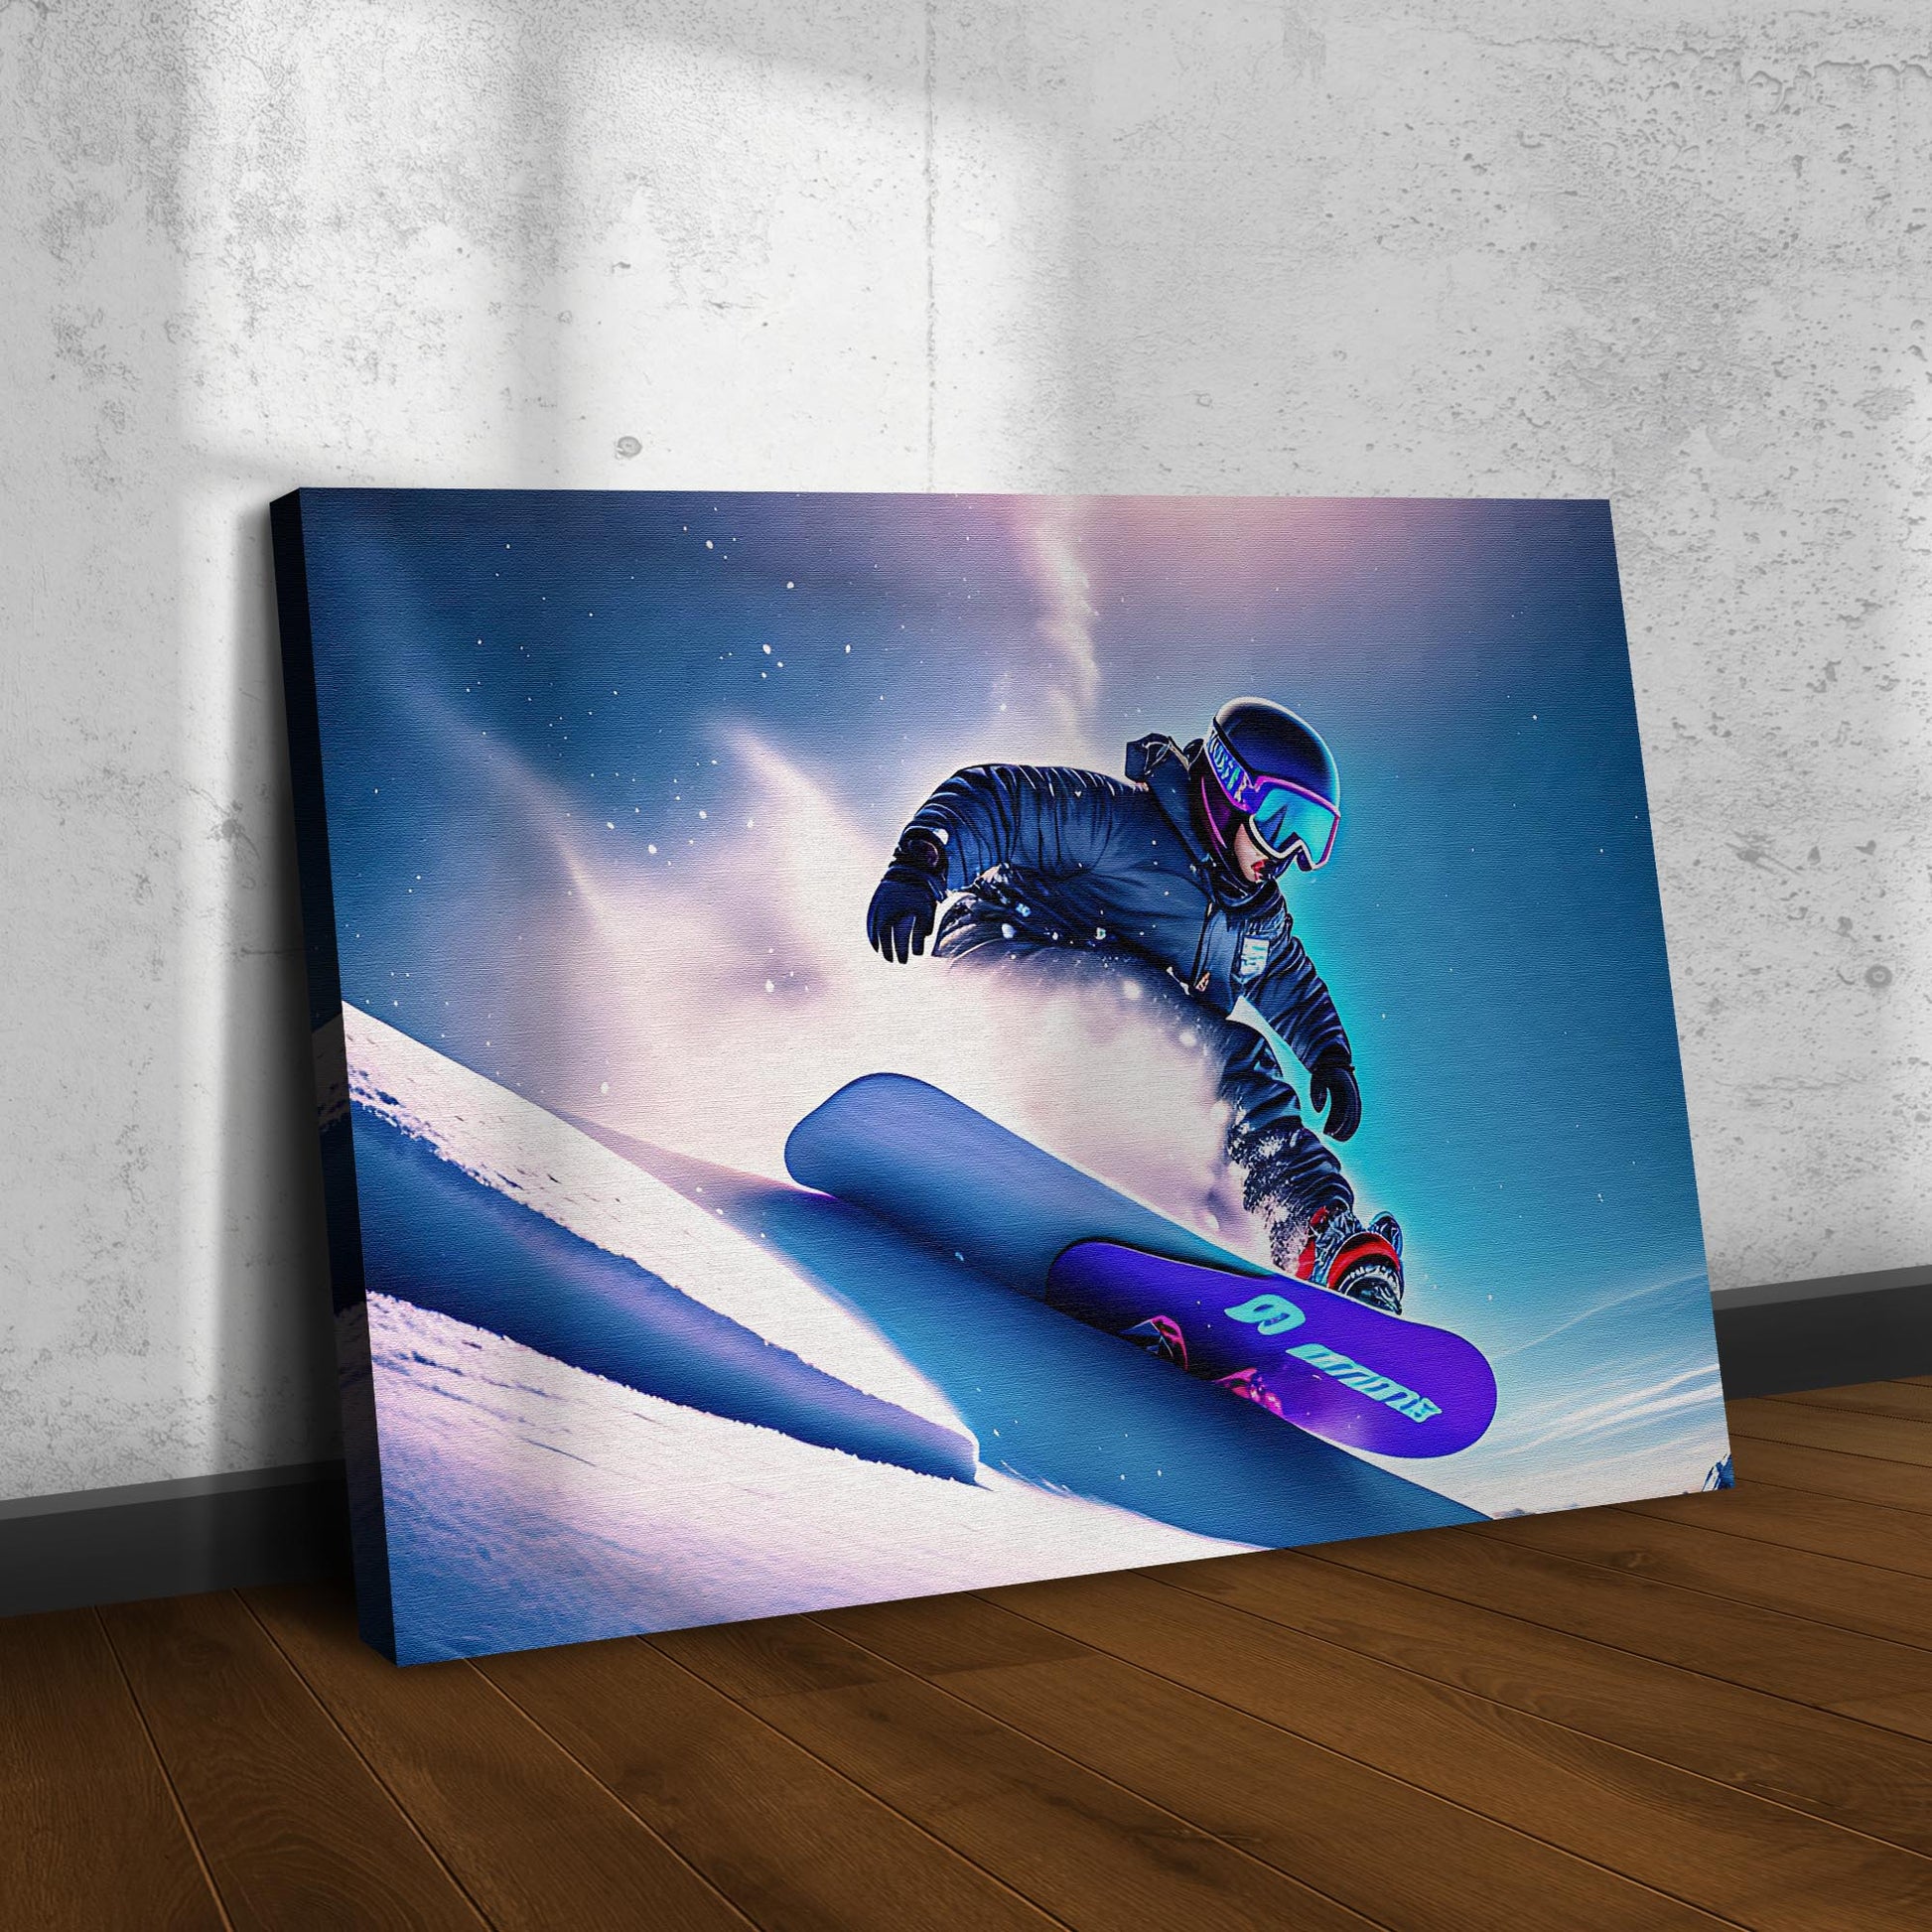 Snowboarding Downhill Canvas Wall Art Style 2 - Image by Tailored Canvases